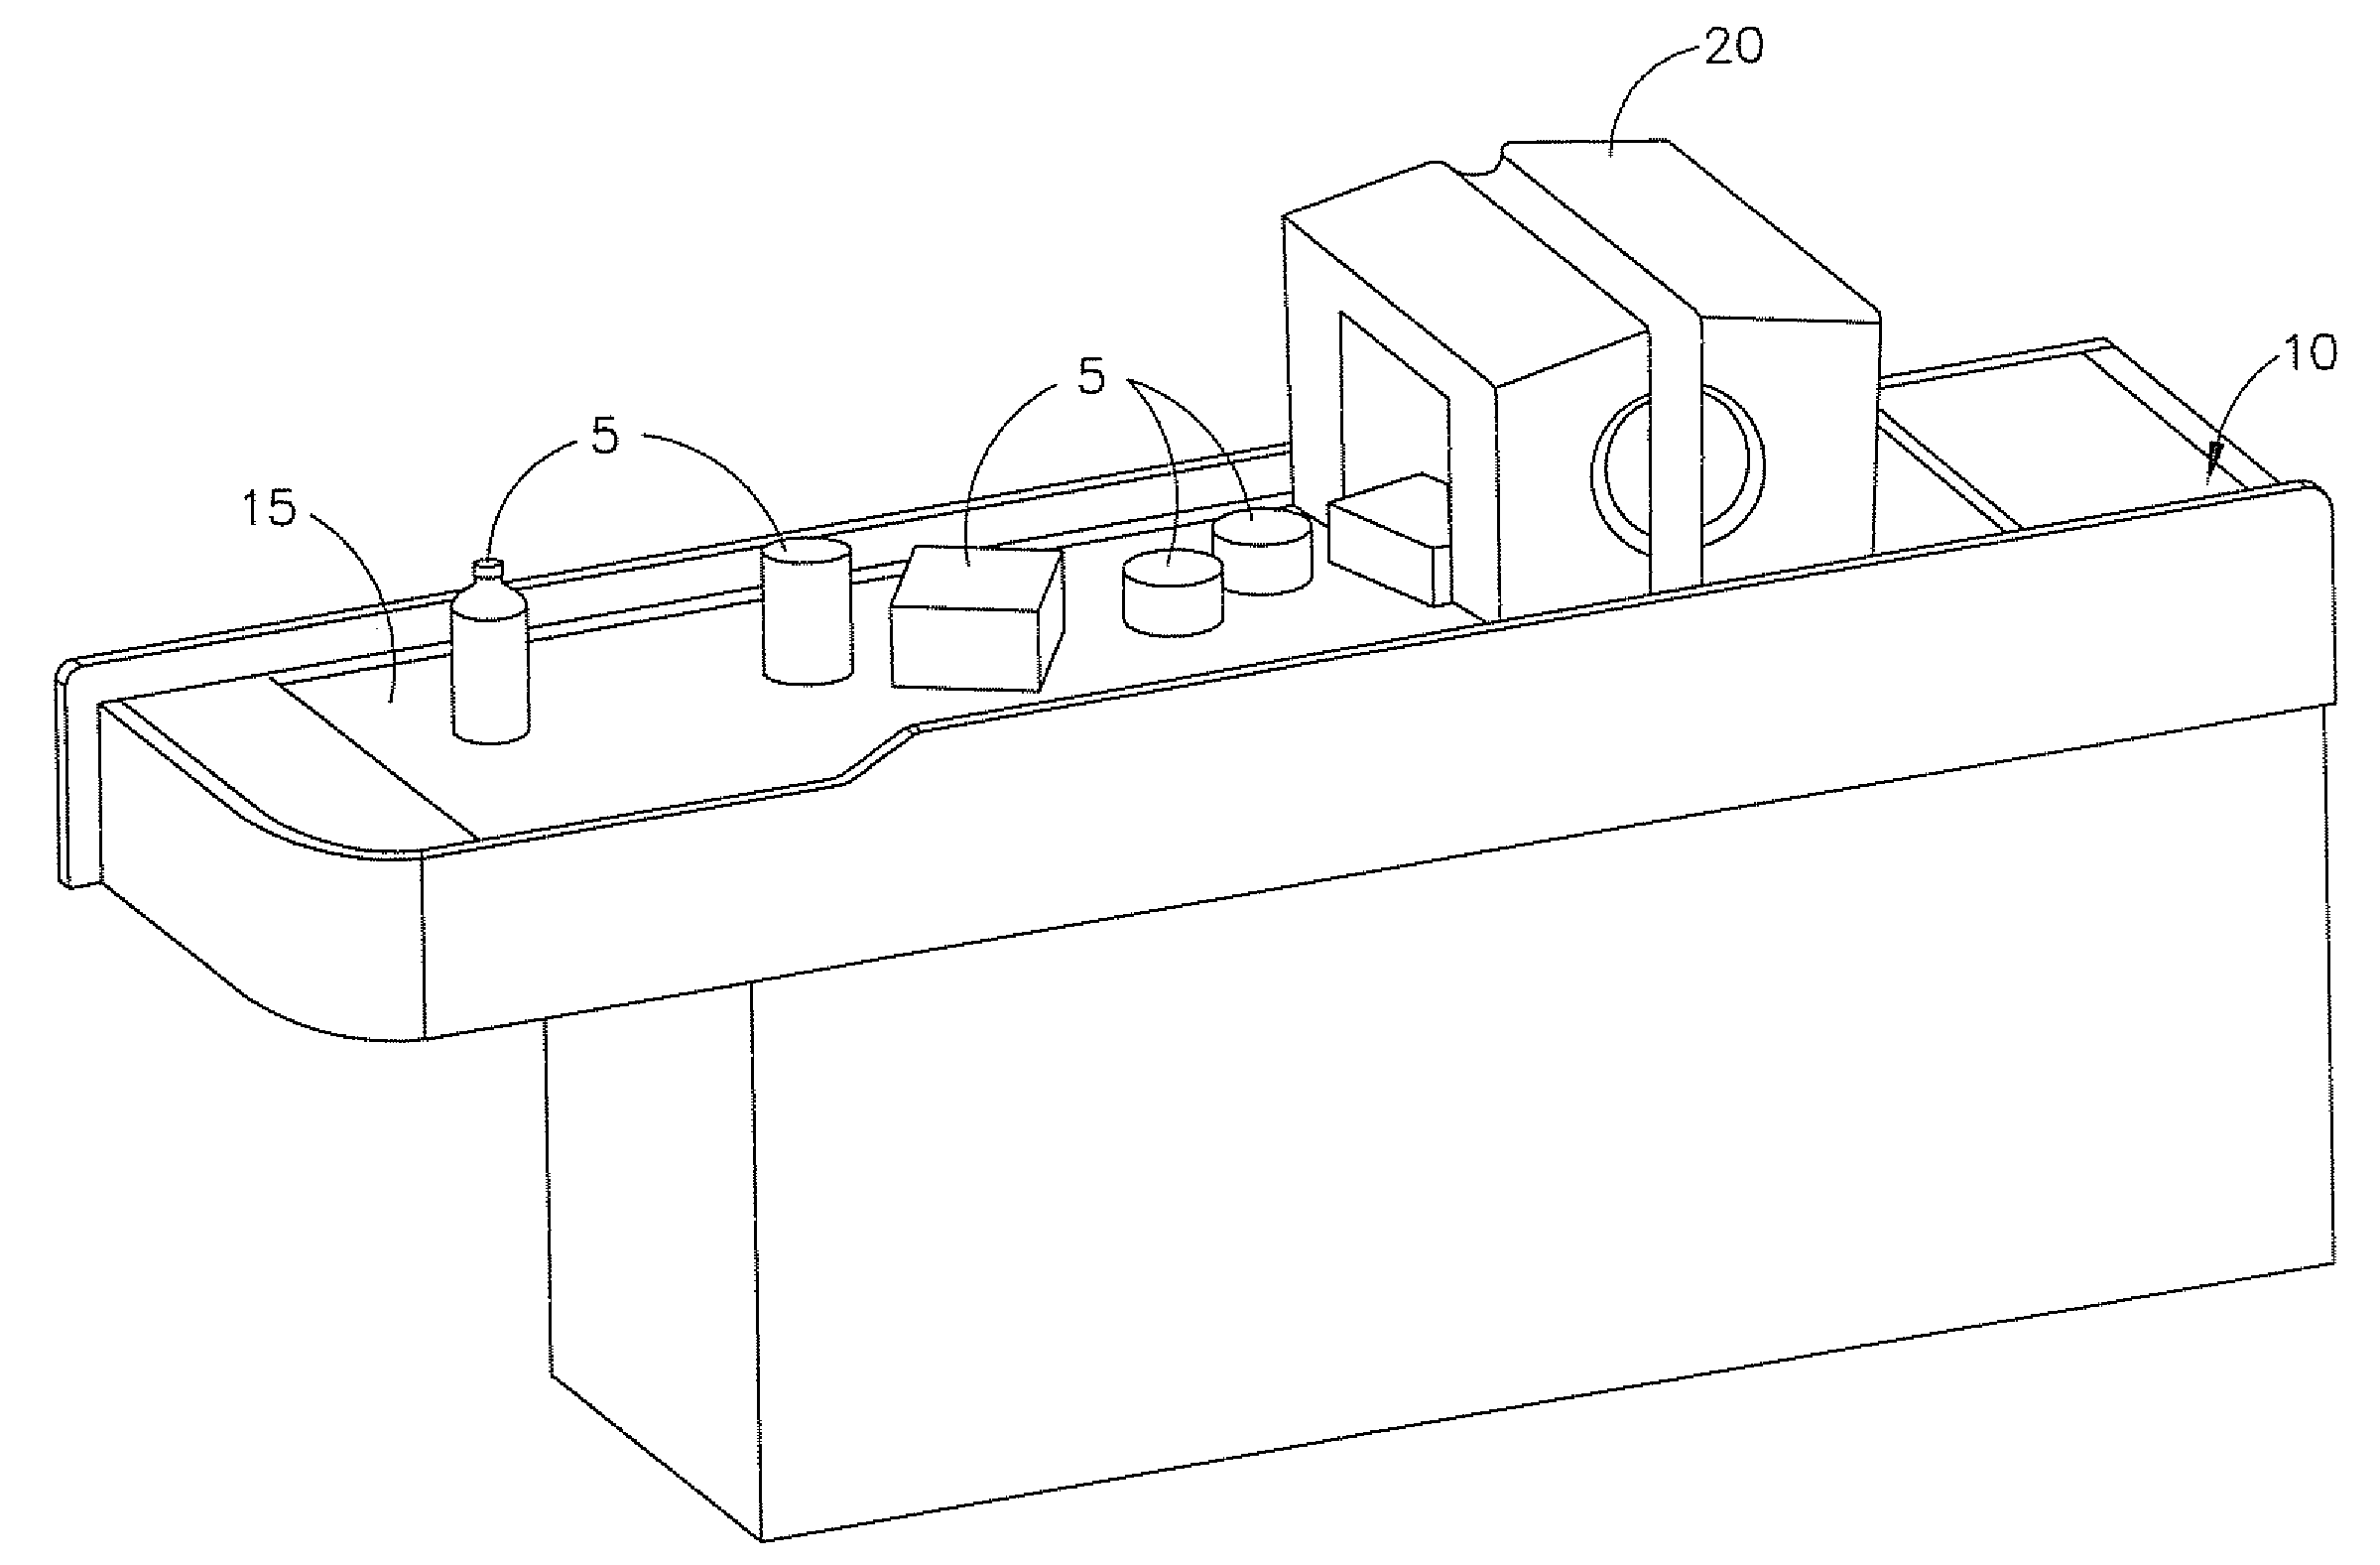 Multi-item scanning systems and methods of items for purchase in a retail environment